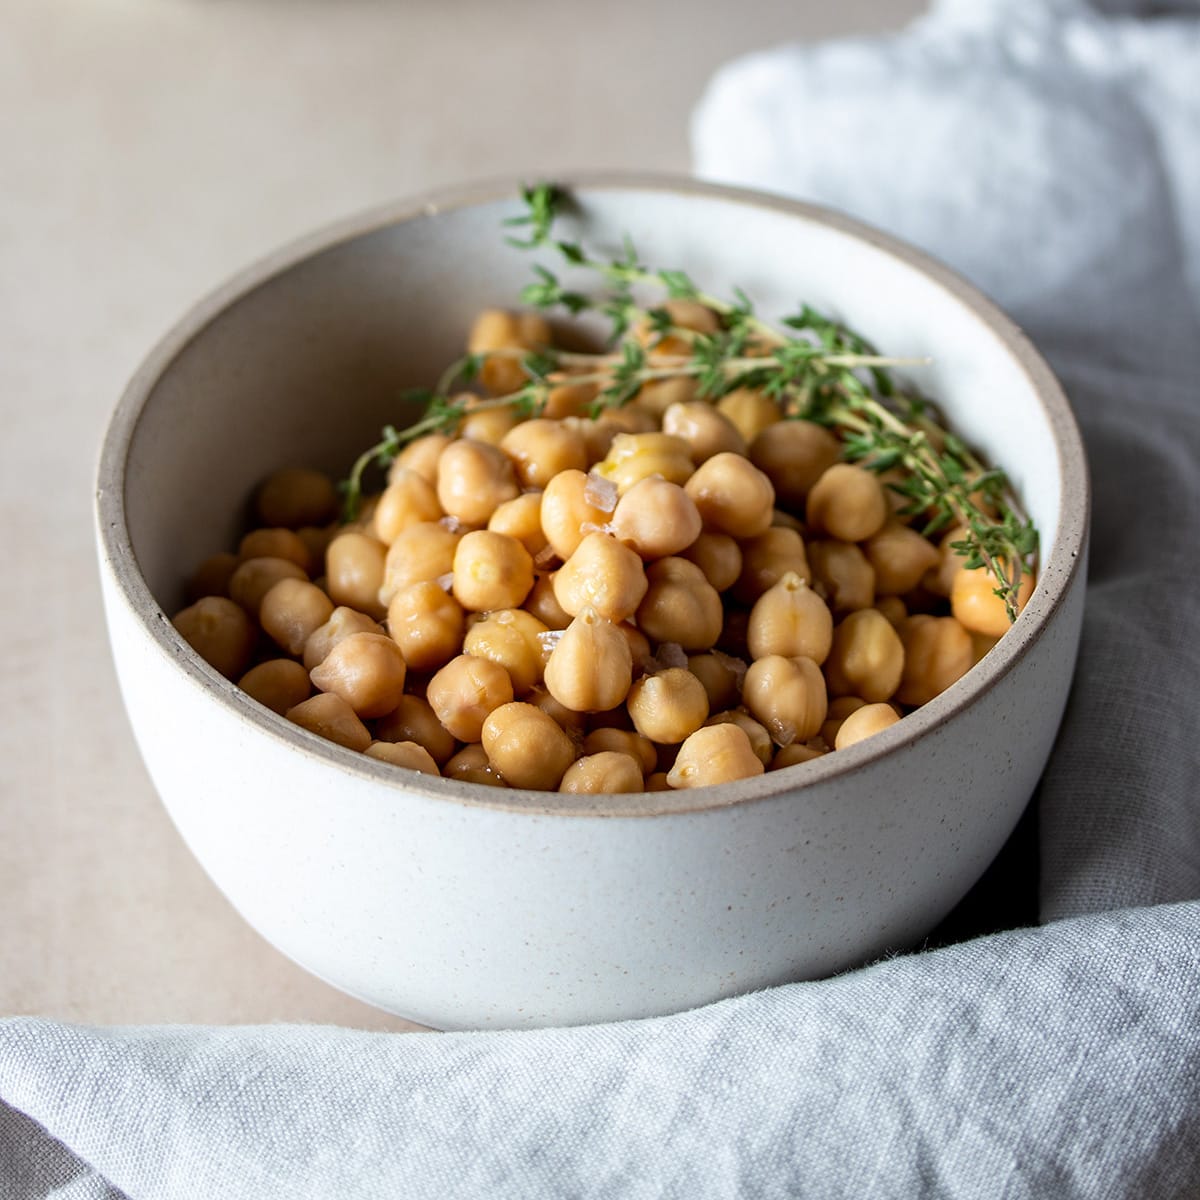 Cooked chickpeas in a white bowl with tan rim and sprigs of thyme and a grey towel around it.